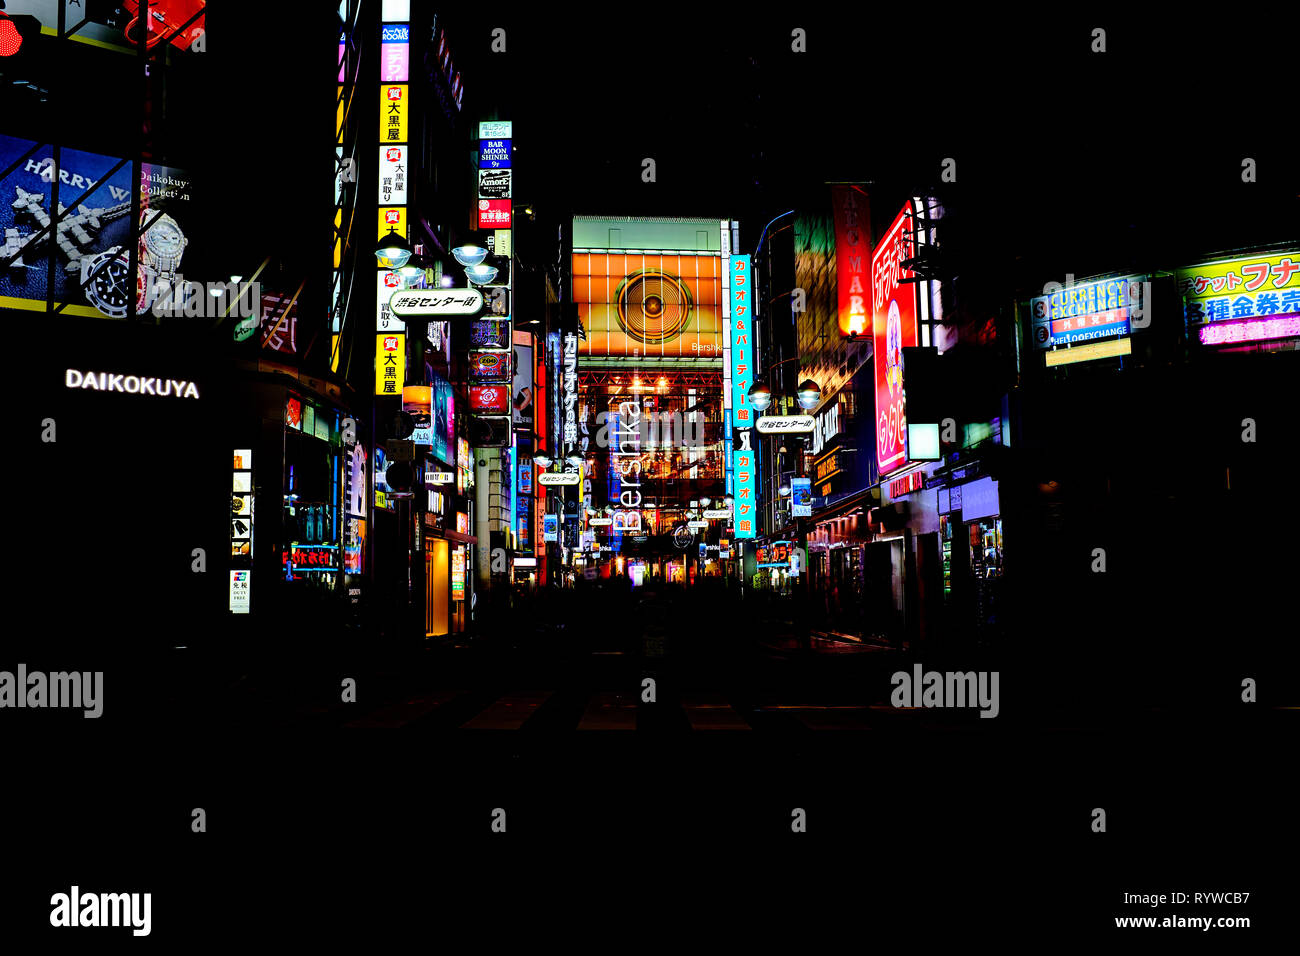 Pictured is Shibuya Tokyo at night. Stock Photo